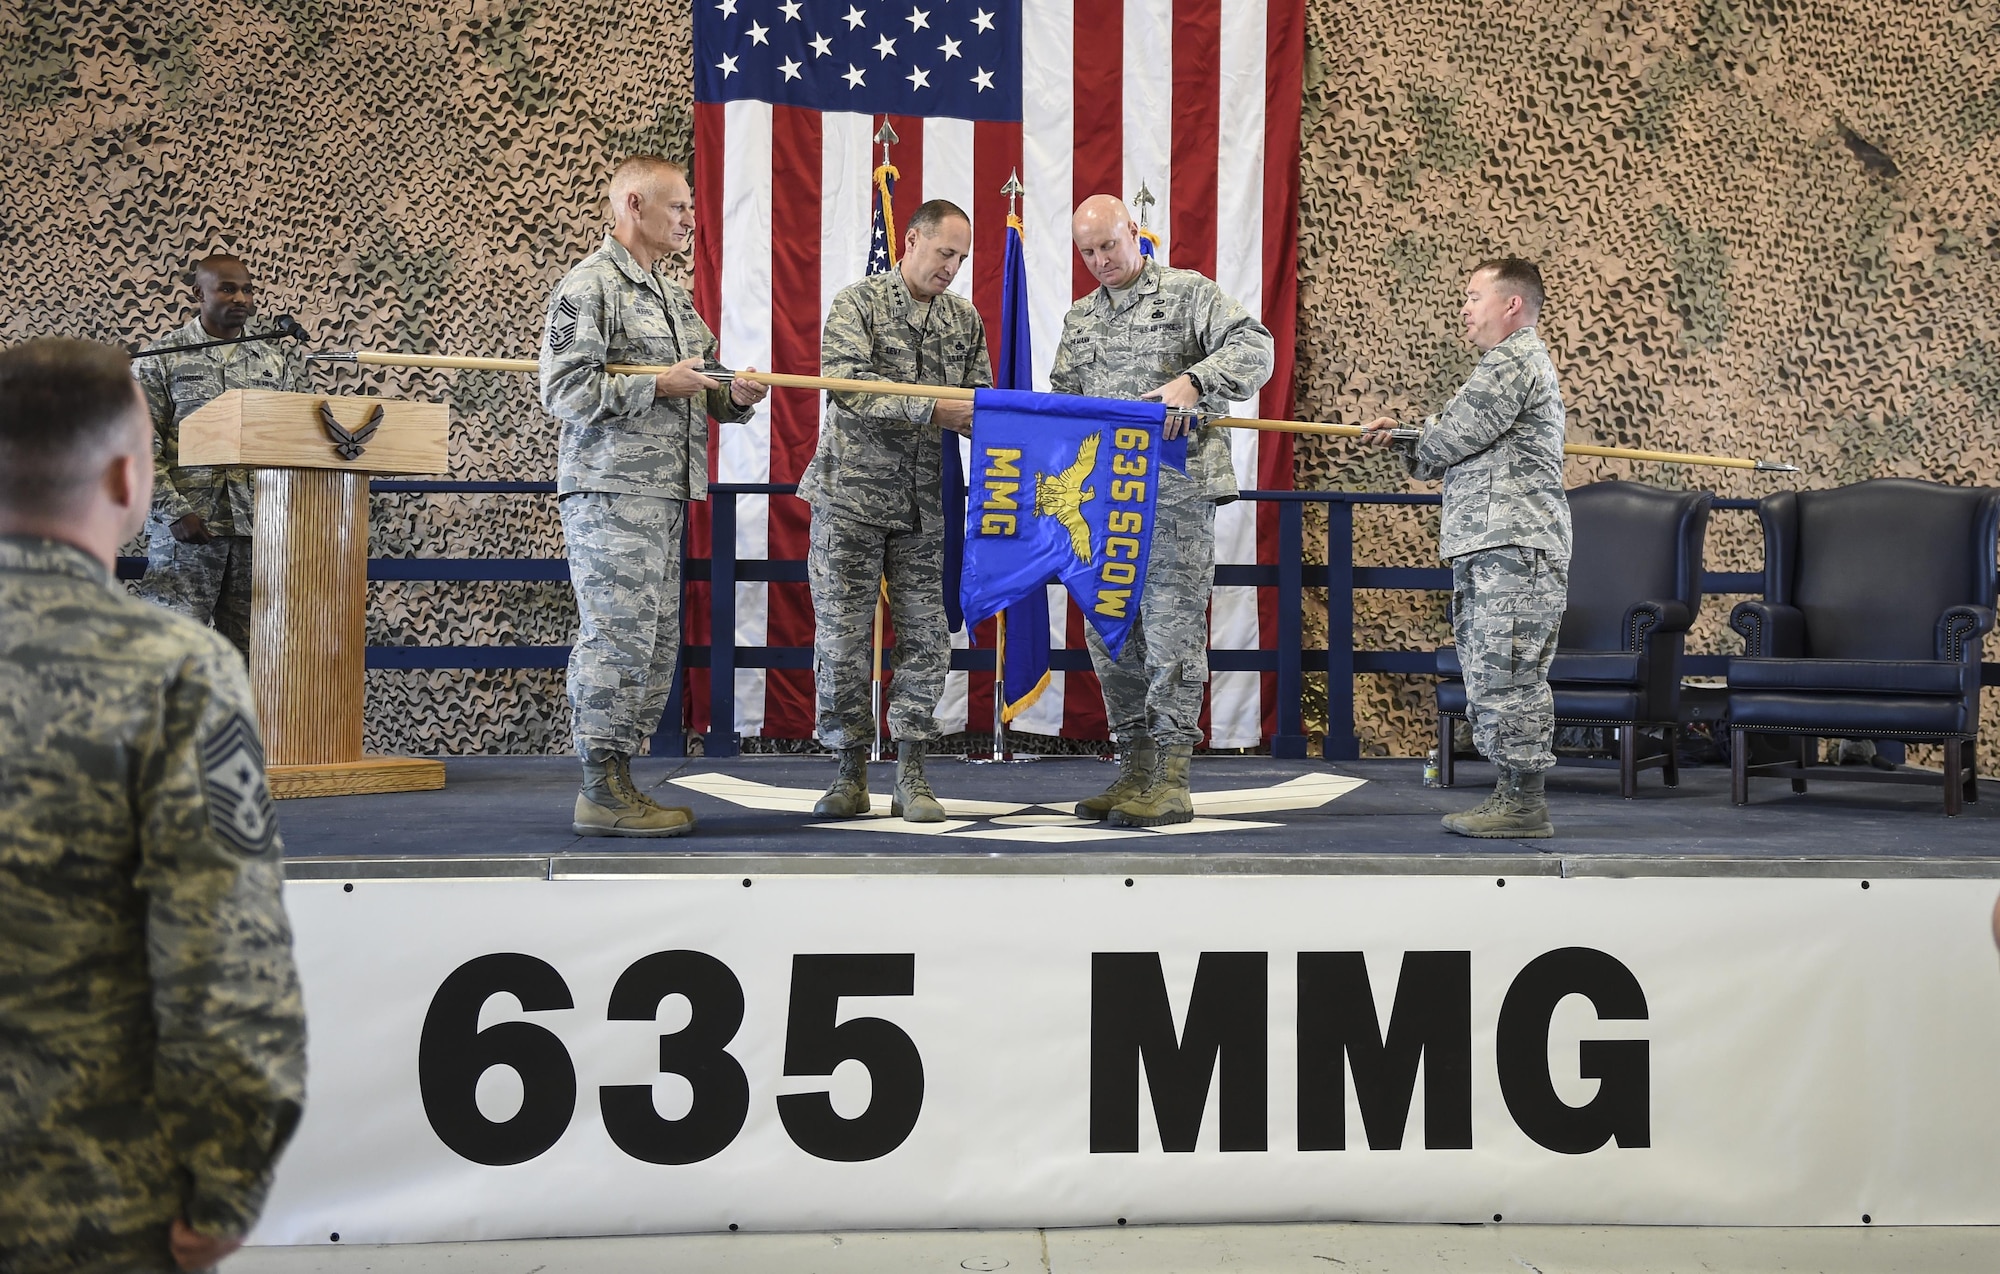 Lt. Gen Lee Levy, commander Air Combat Command and Col. Joseph Moehlmann, commander 635th Materiel Maintenance Group unfurled the new banner during the 49th Materiel Maintenance Group transition to the 635th MMG re-designation ceremony Oct. 20, 2016 at Holloman Air Force Base N.M. The Ceremony marks the historic event of the Materiel Maintenance Group moving from Air Combat command over to Air Force Material Command. (U.S. Air Force photo by Staff Sgt. Stacy Jonsgaard)